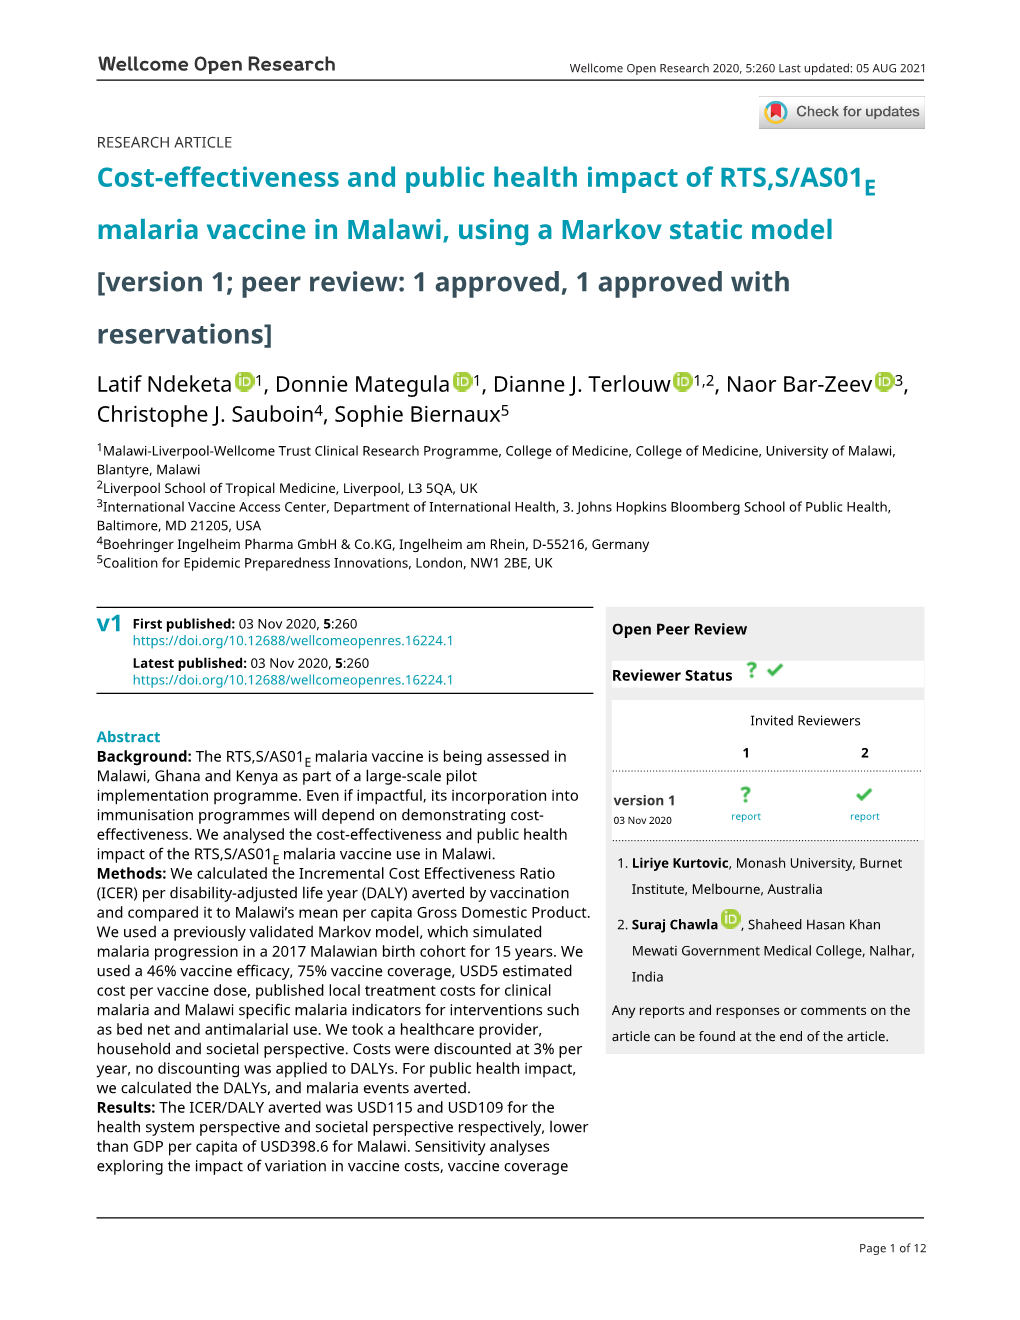 Cost-Effectiveness and Public Health Impact of RTS,S/AS01 Malaria Vaccine in Malawi, Using a Markov Static Model